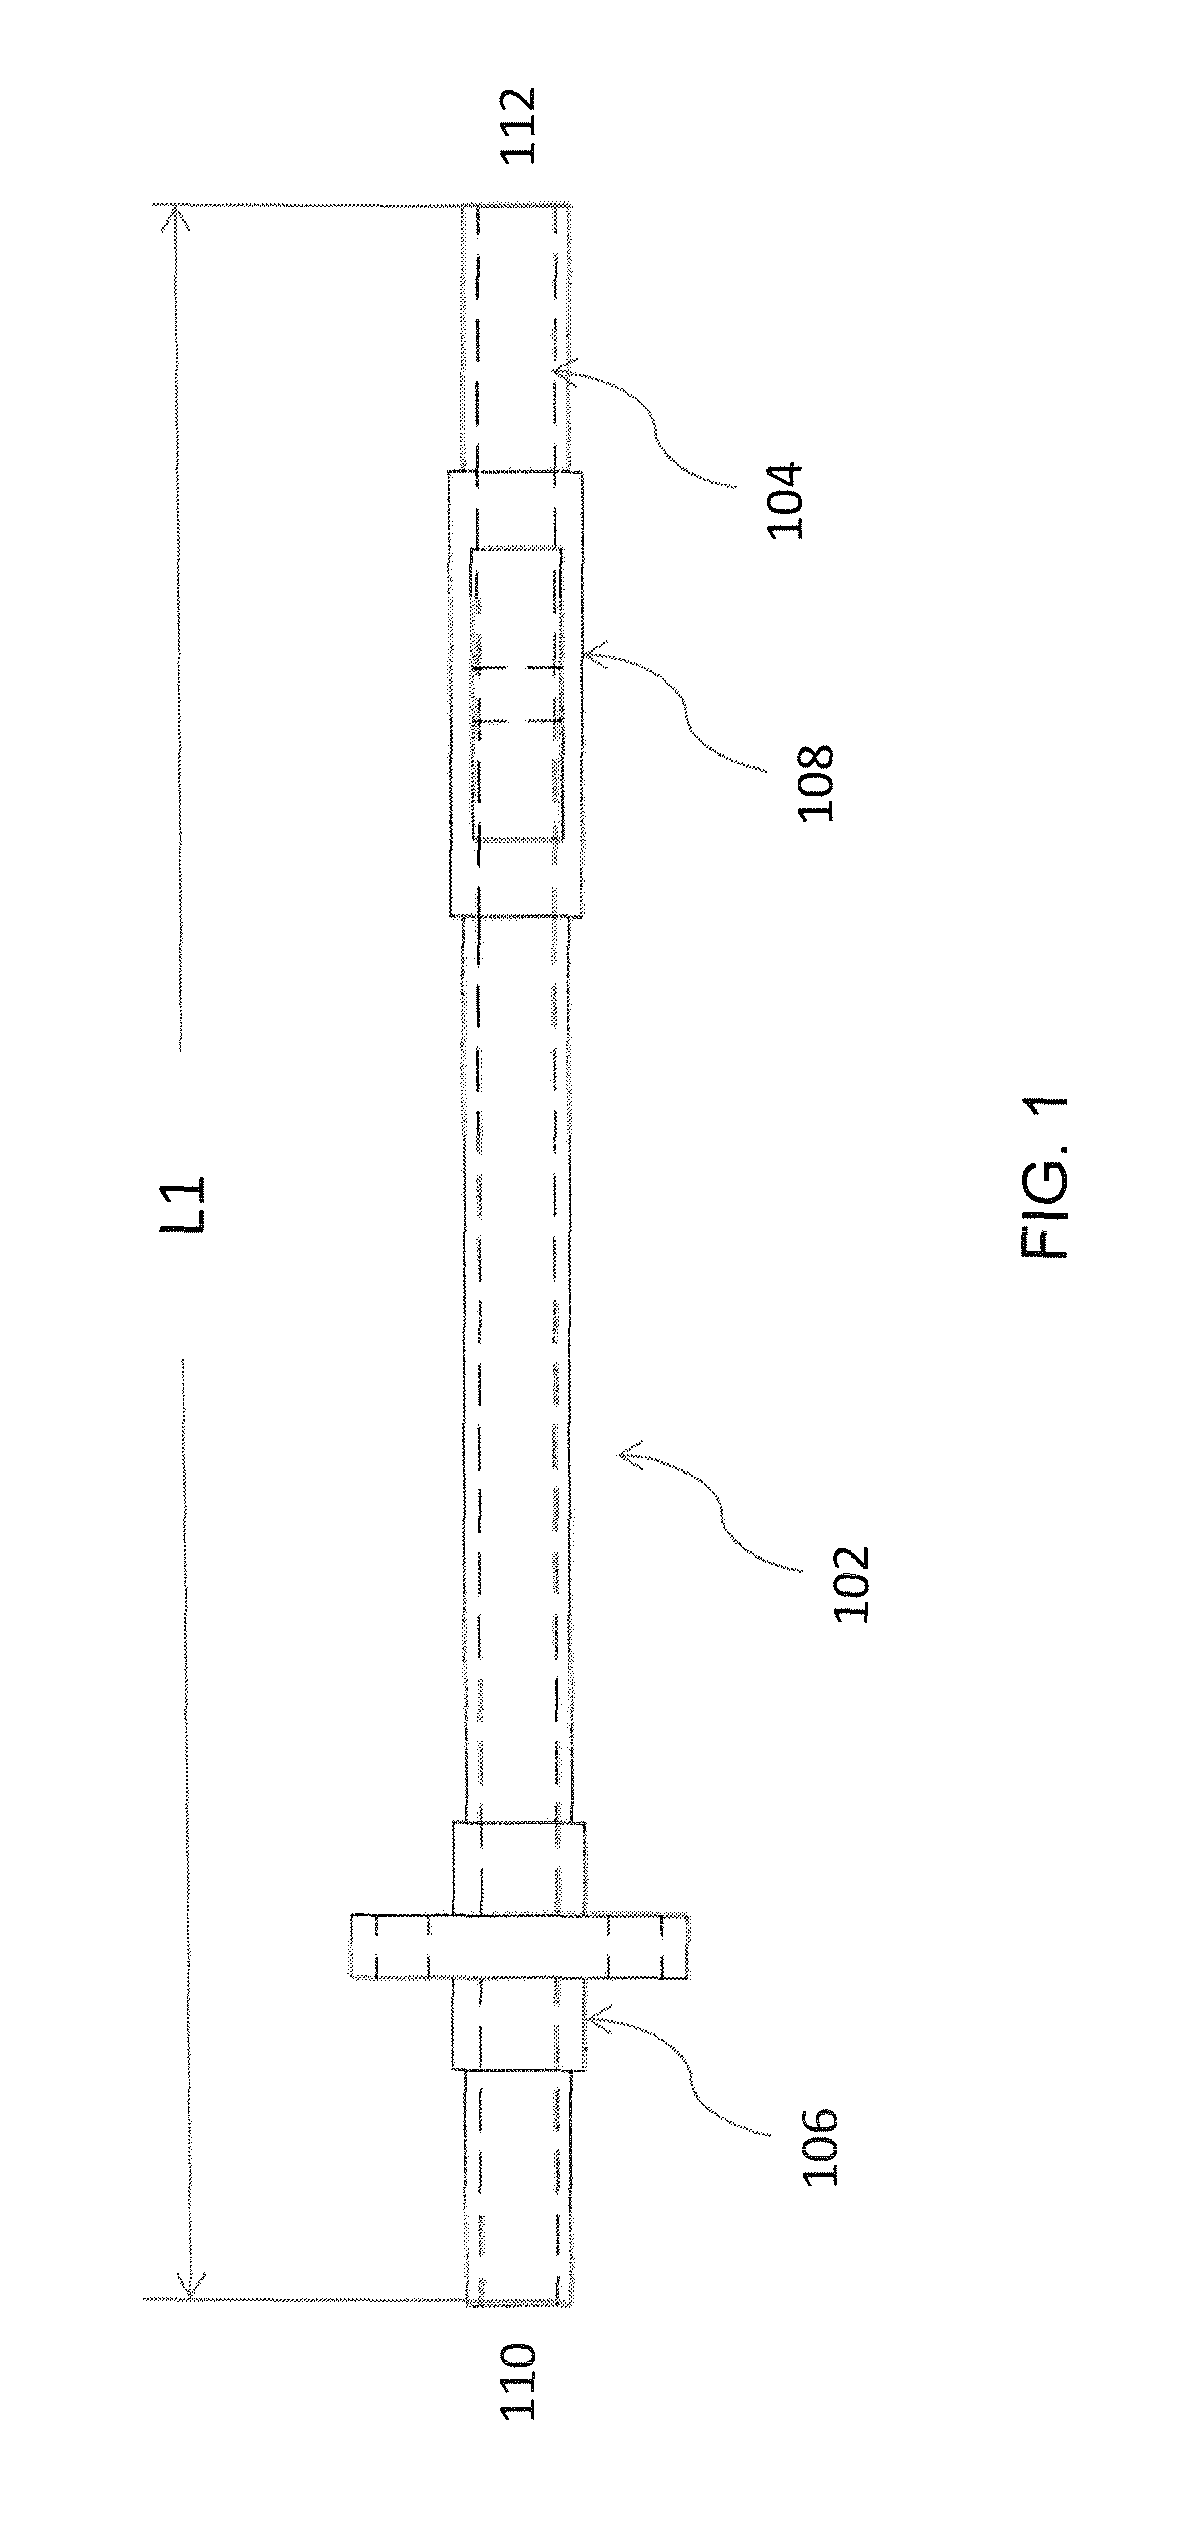 Implant device for use in salivary gland duct